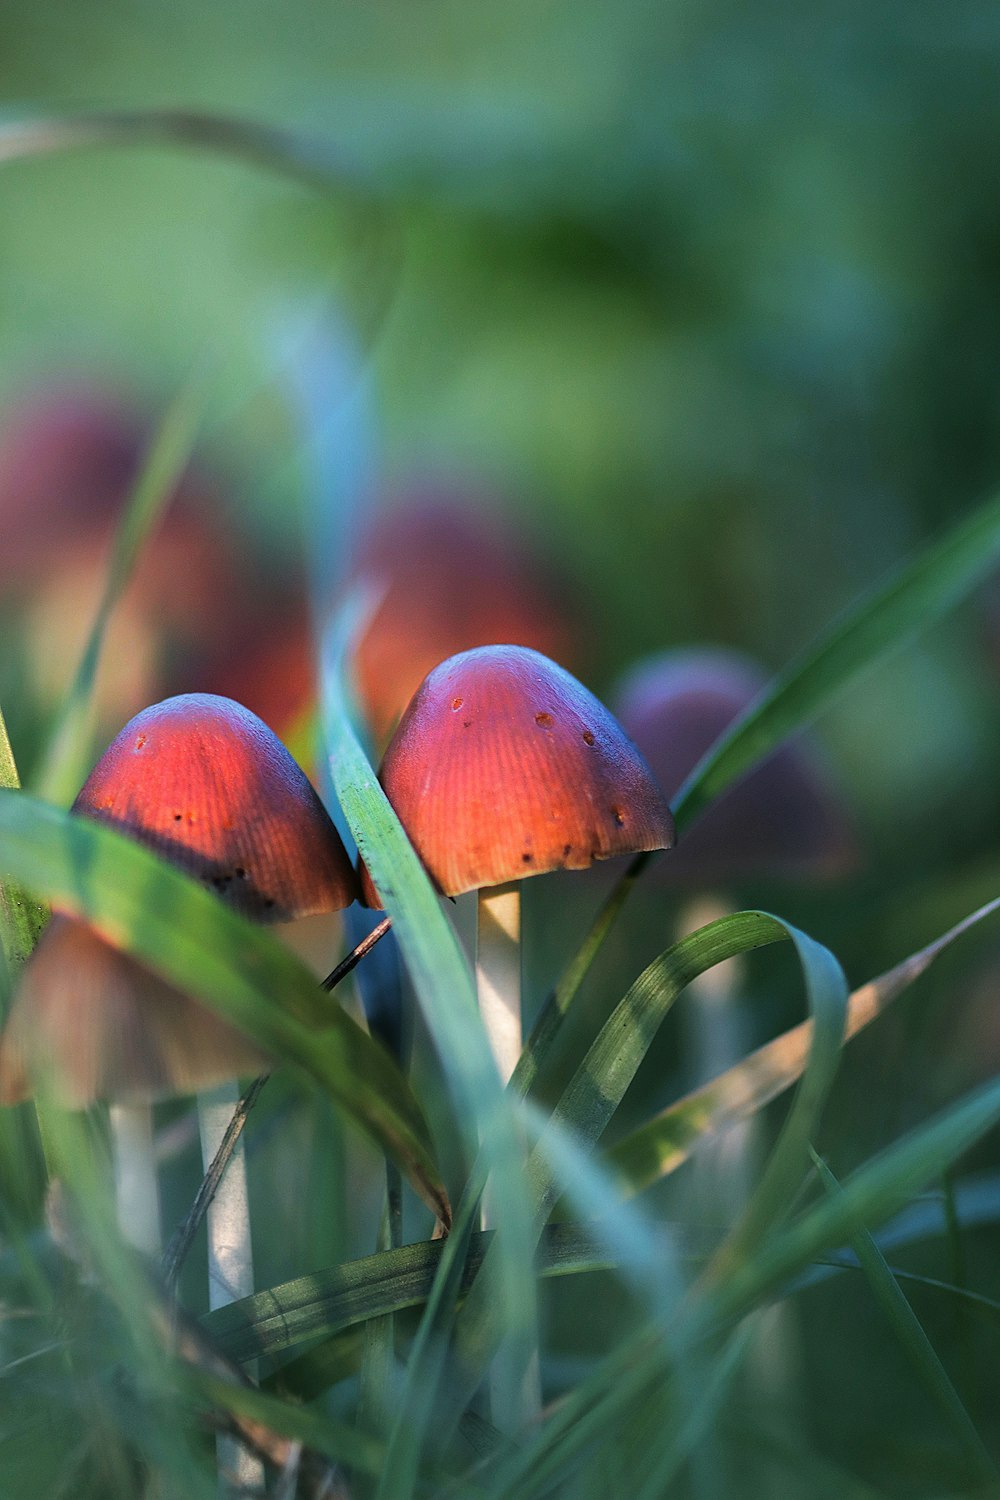 a group of small mushrooms sitting on top of a lush green field